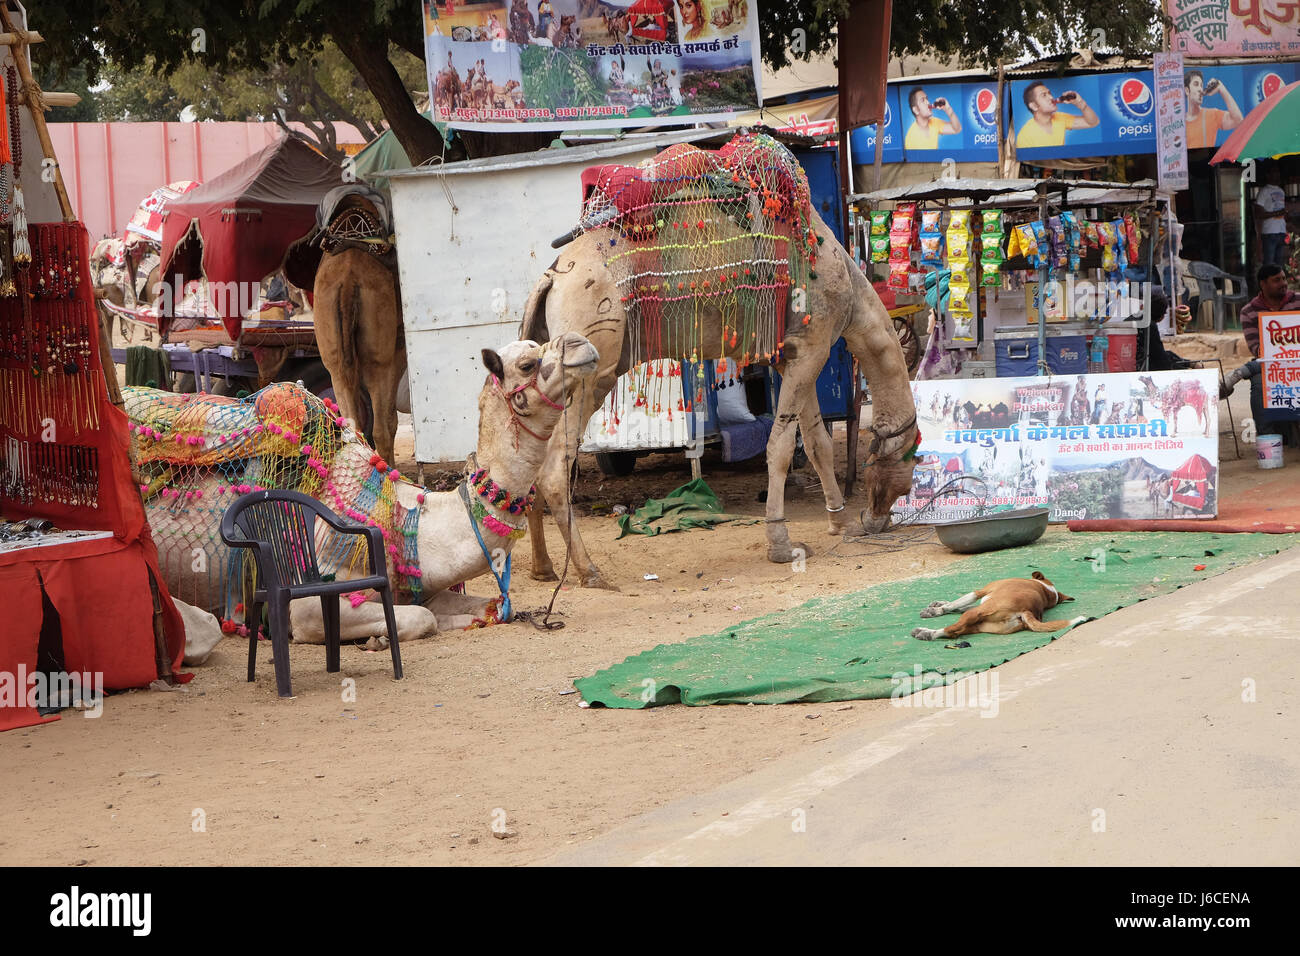 Camel resting while waiting tourist in the Great Indian Thar Desert near Pushkar, Rajasthan, India on February 17, 2016. Stock Photo